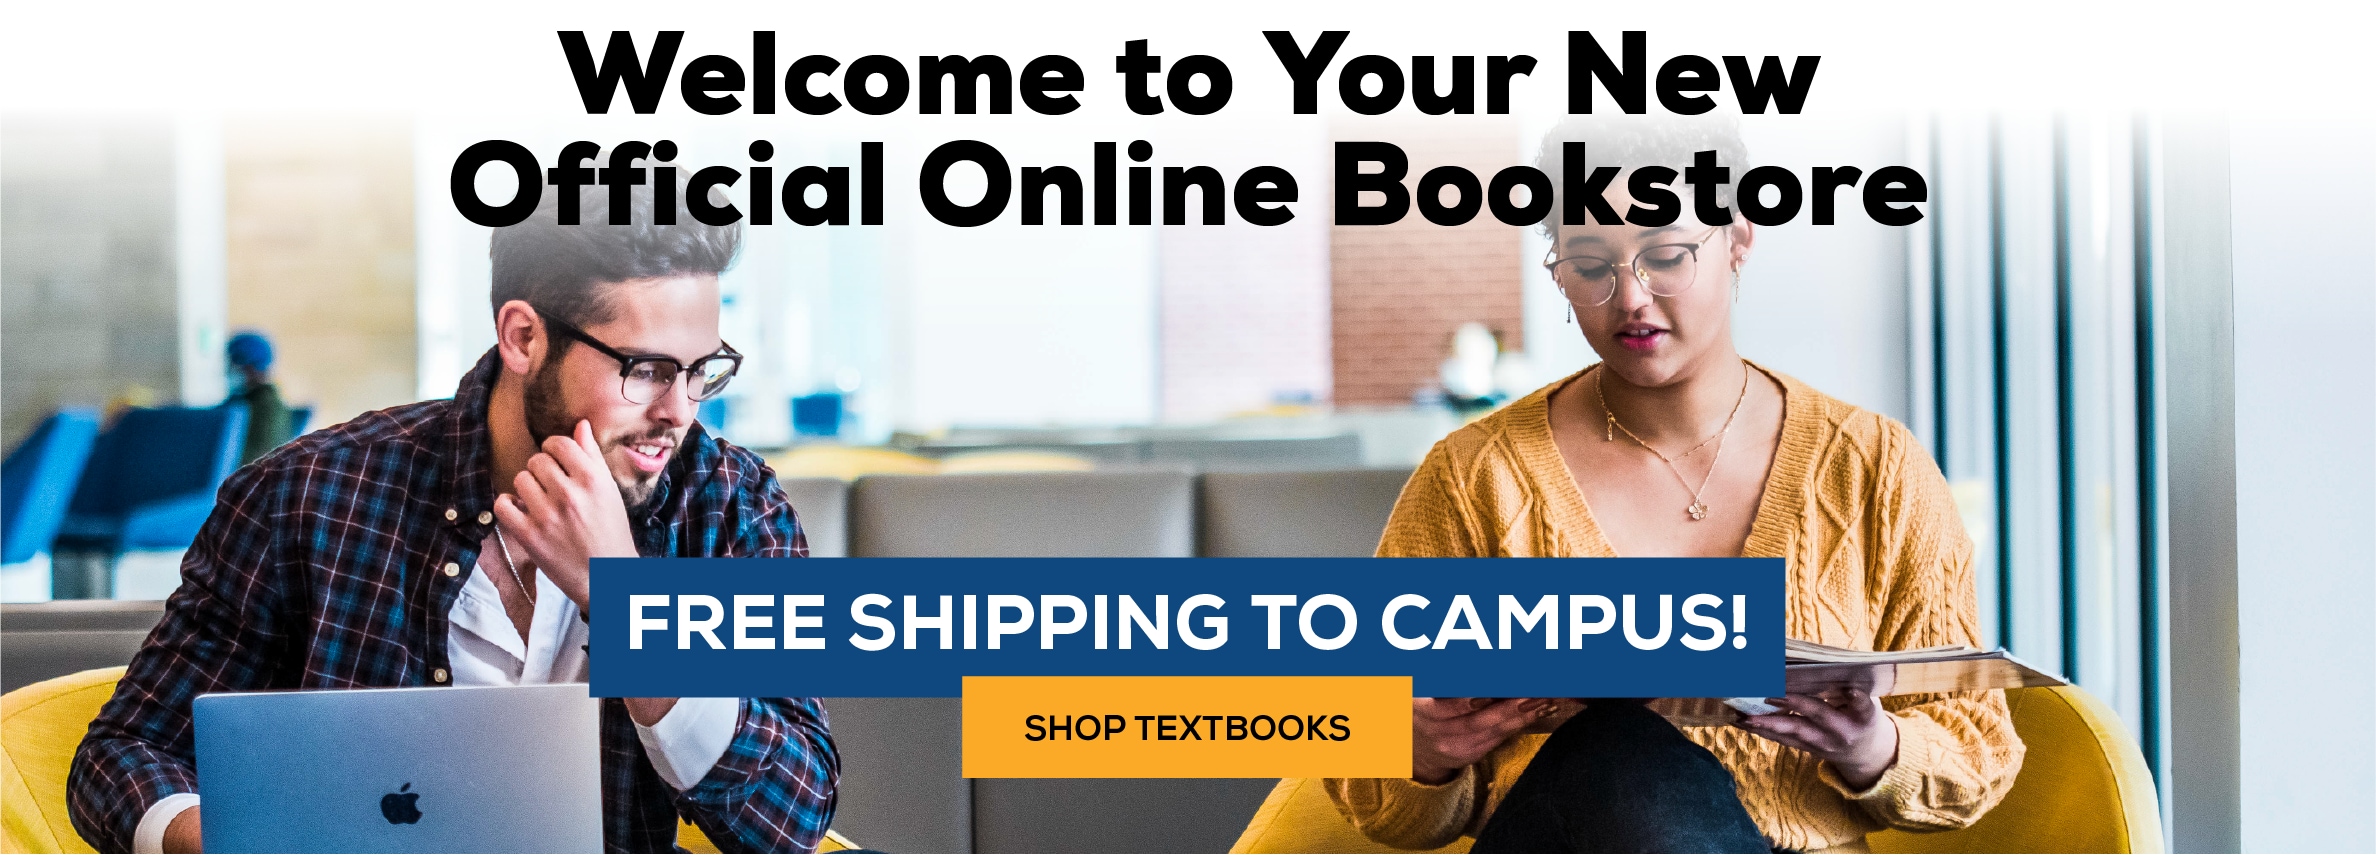 Welcome to your new official online bookstore. Free shipping to campus!Shop textbooks